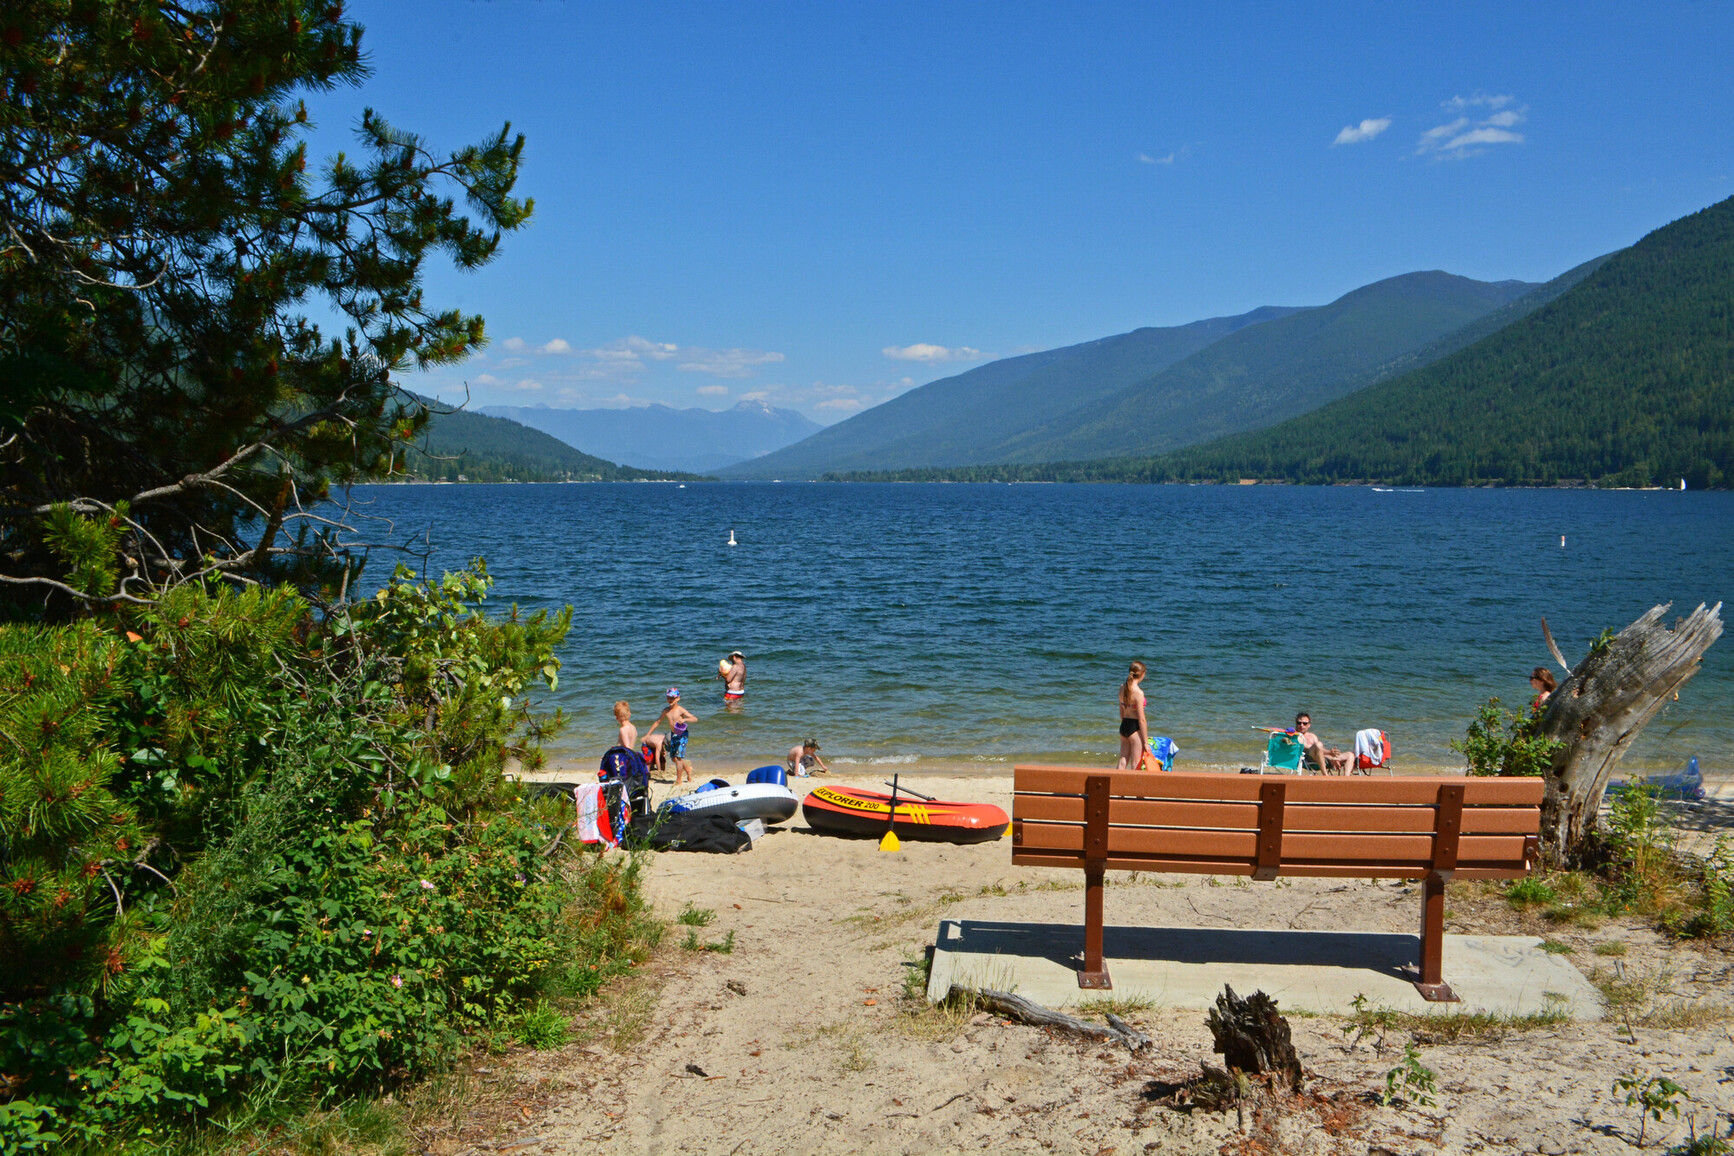 Families at beach with kids. View of lake and mountains.